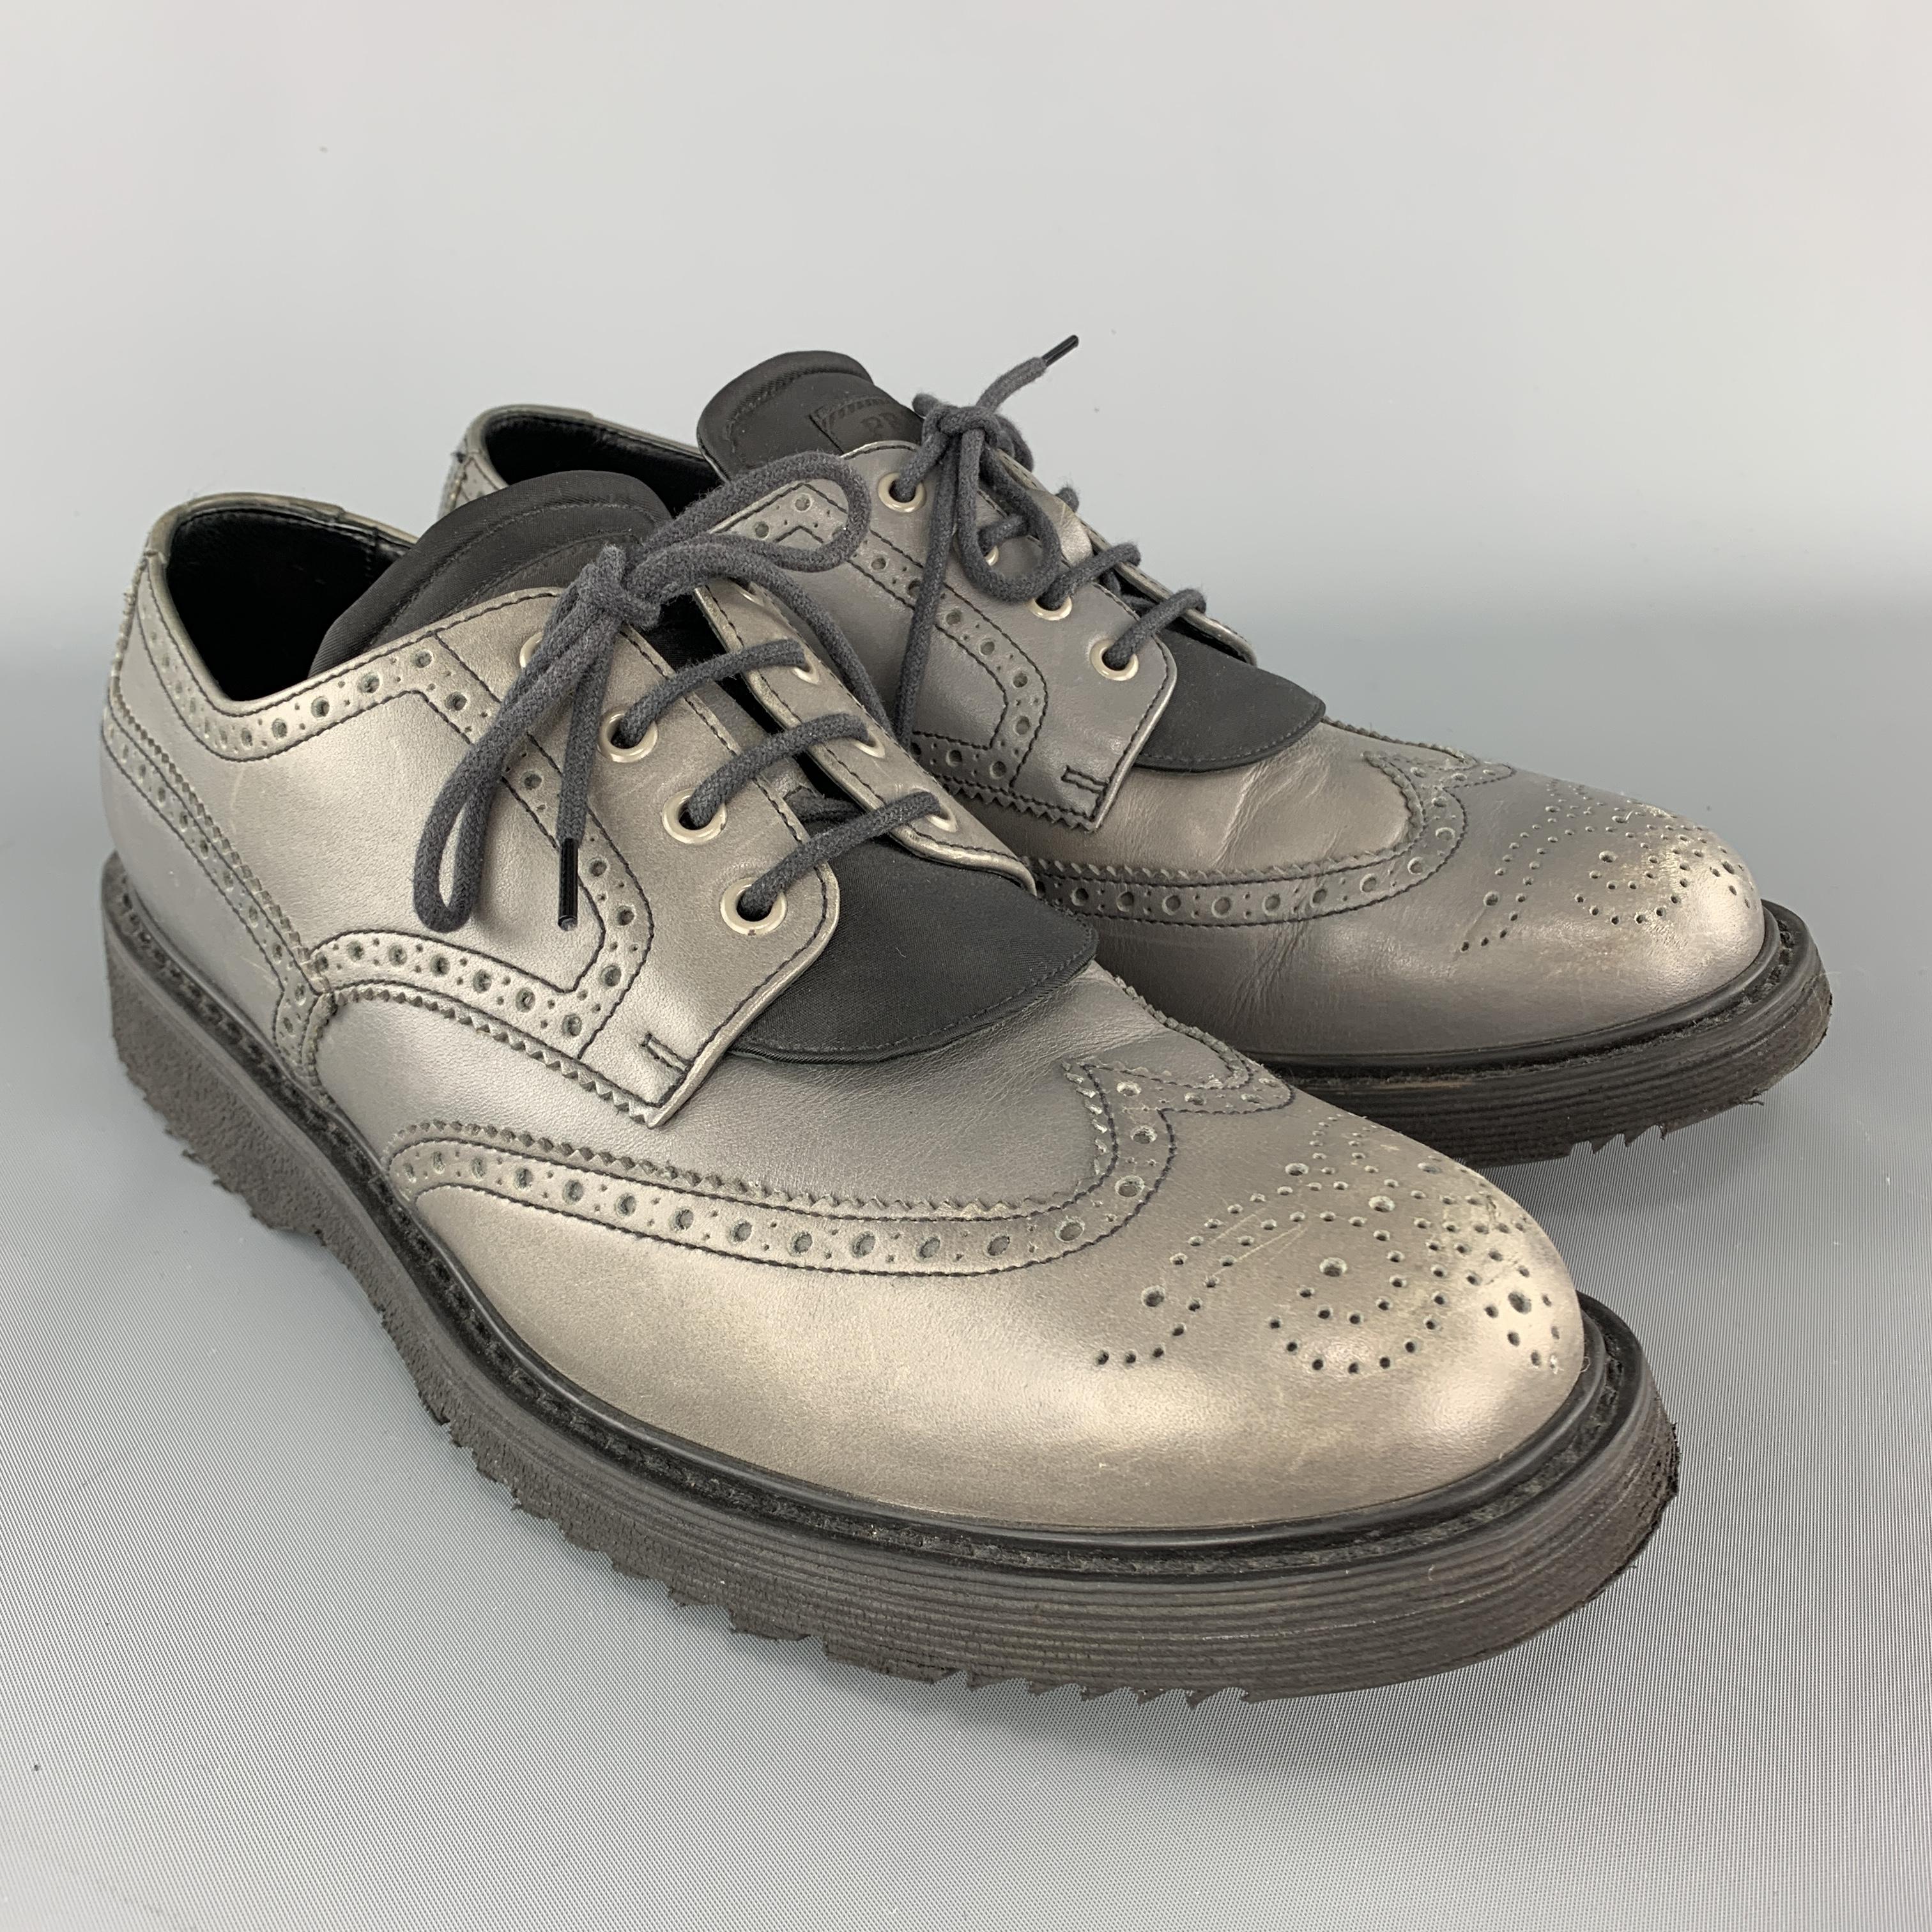 PRADA dress shoes come in gray leather with a medallion wingtip toe, nylon twill padded logo tongue, and rubber sole. Wear and discoloration throughout. As-is Made in Italy.

Fair Pre-Owned Condition.
Marked: UK 10

Outsole: 12.75 x 5 in.